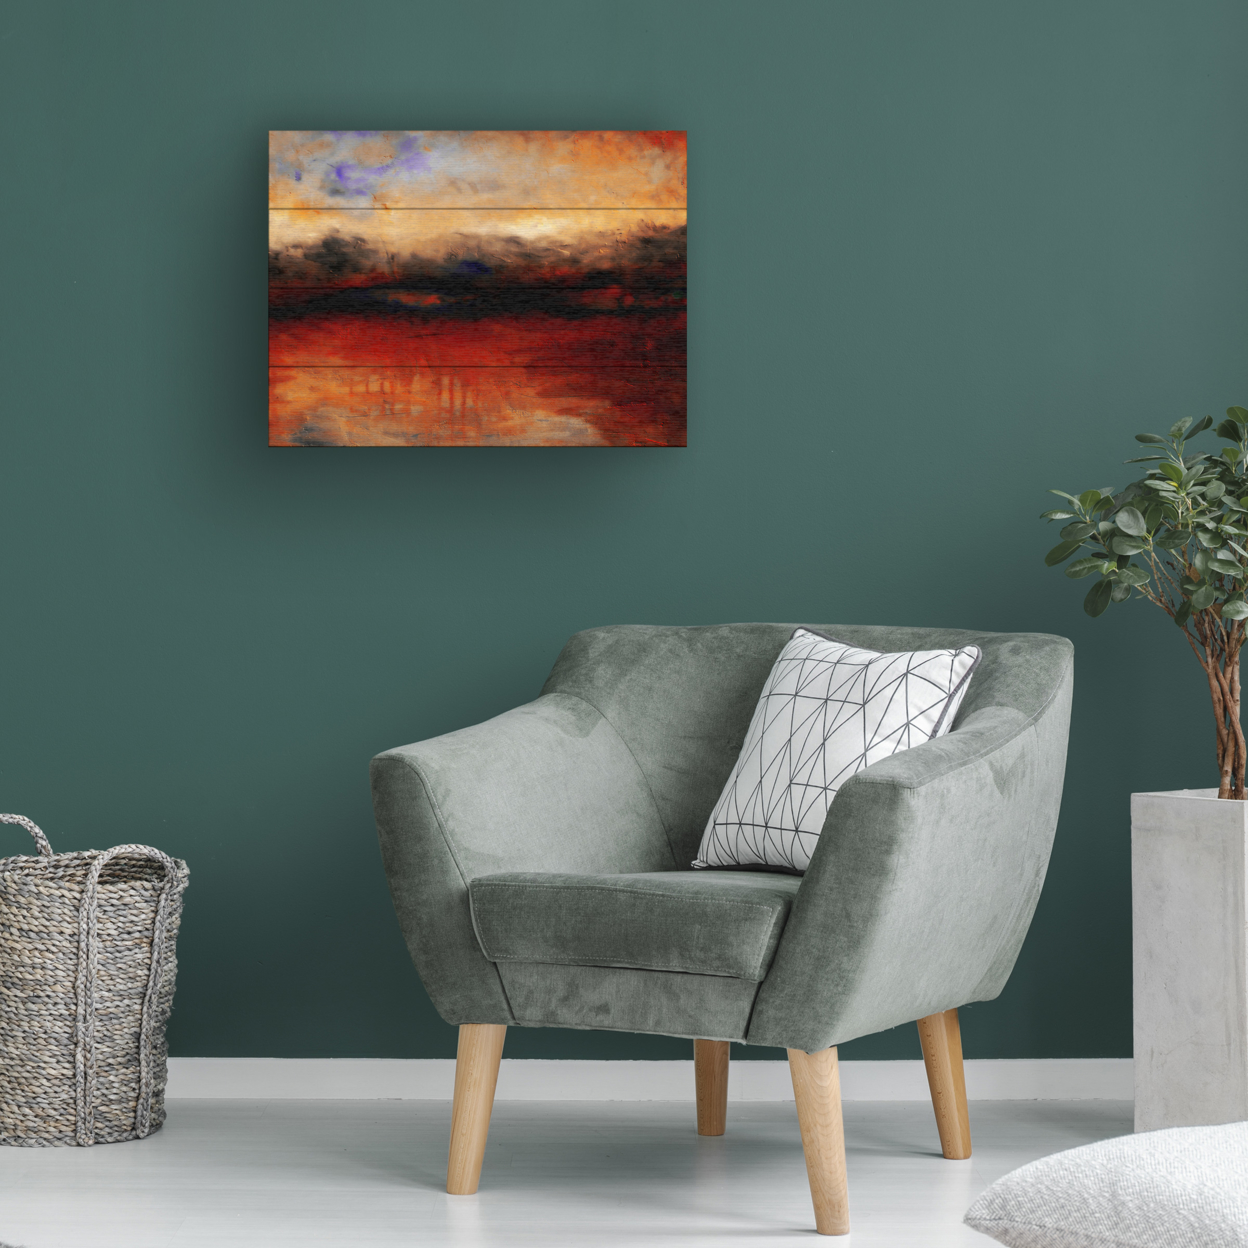 Wall Art 12 X 16 Inches Titled Red Skies At Night Ready To Hang Printed On Wooden Planks